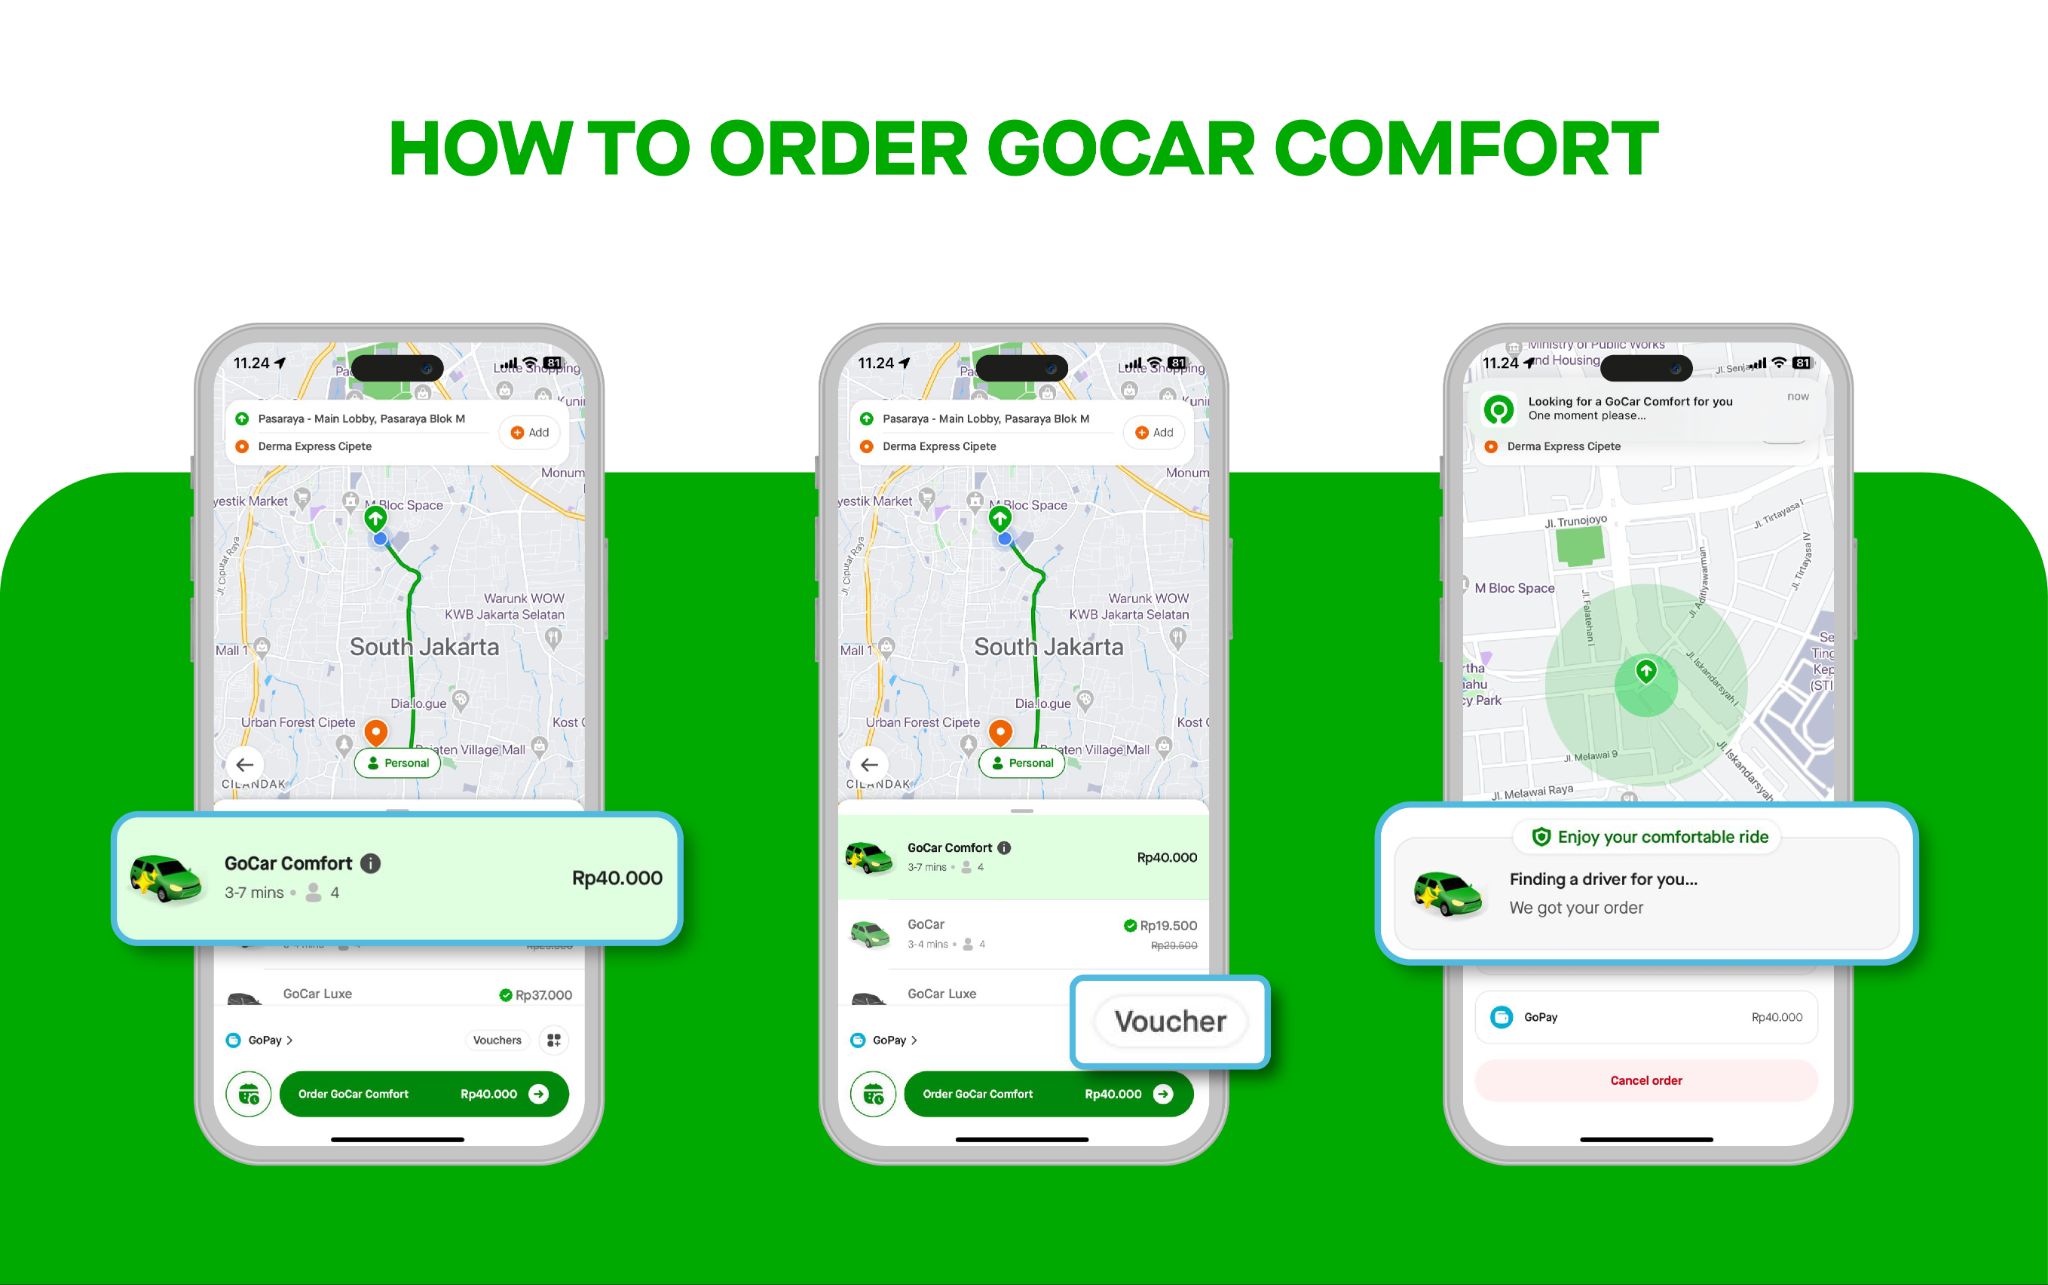 Travel More Comfortably with GoCar Comfort